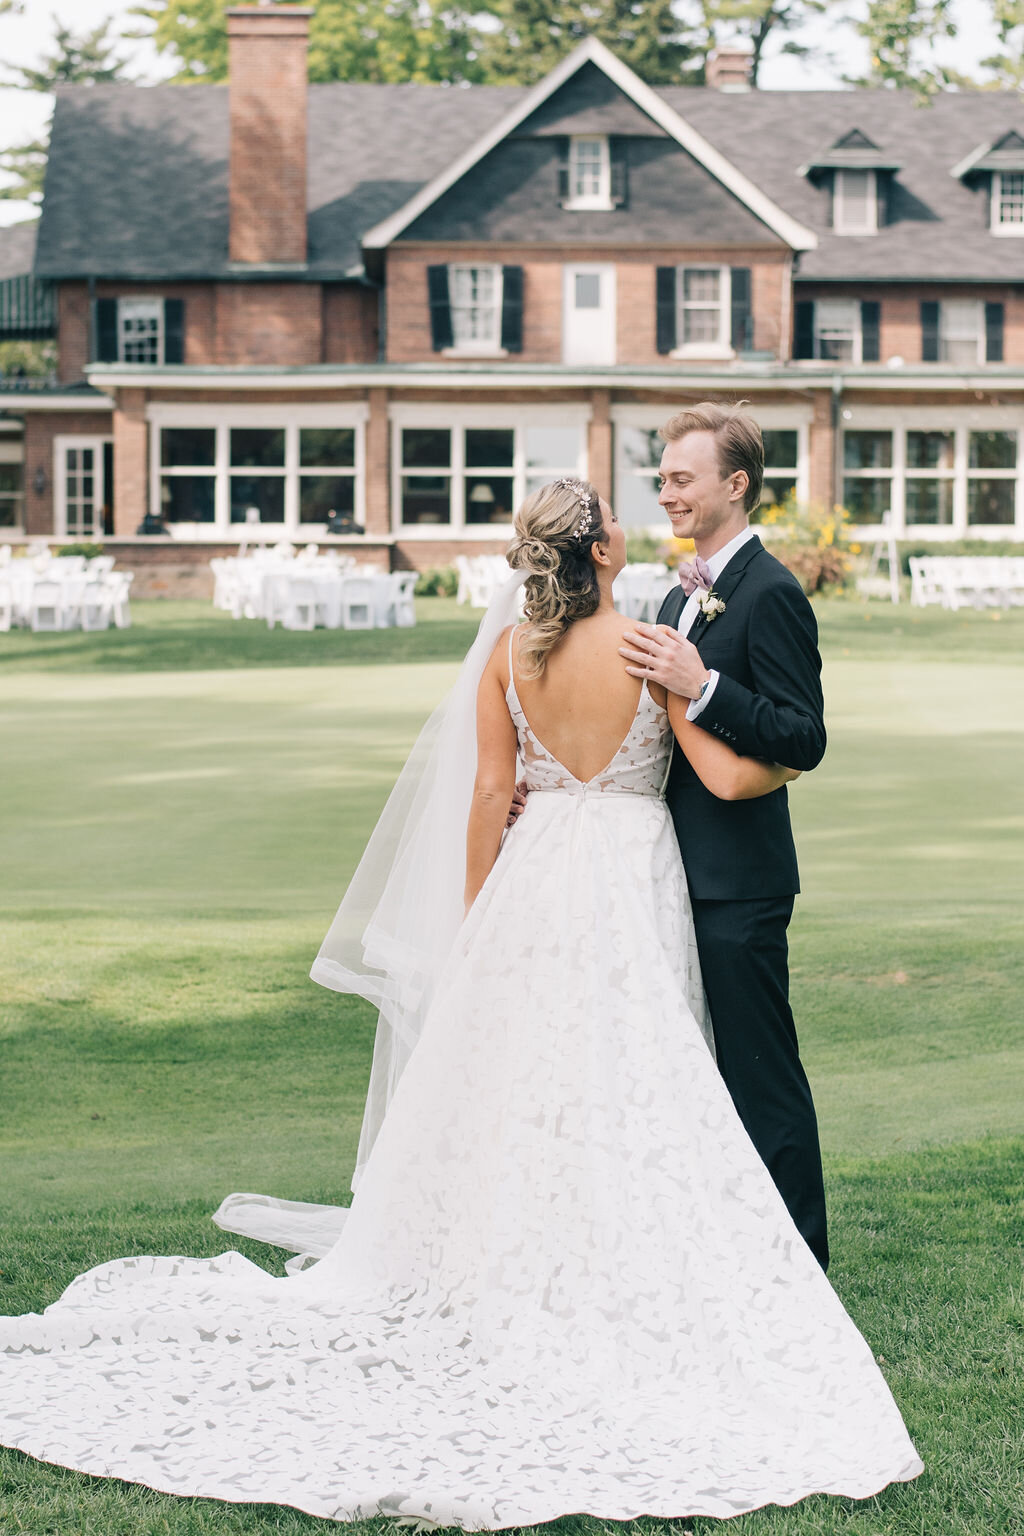 Bride and groom's timeless wedding day at the Toronto Golf Club photographed by Toronto Wedding Photographers, Ugo Photography